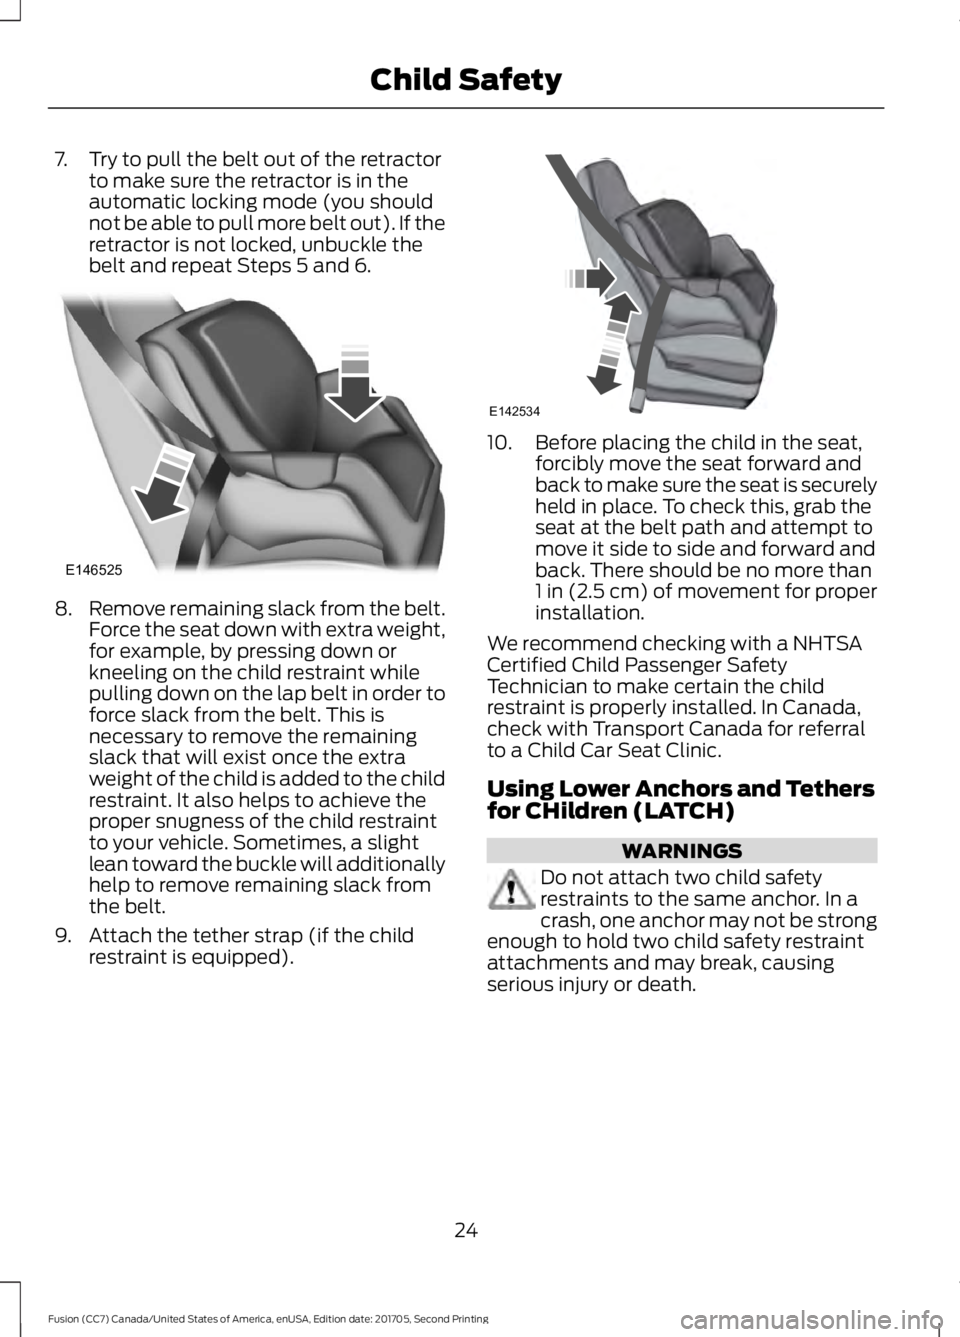 FORD FUSION 2018  Owners Manual 7. Try to pull the belt out of the retractor
to make sure the retractor is in the
automatic locking mode (you should
not be able to pull more belt out). If the
retractor is not locked, unbuckle the
be